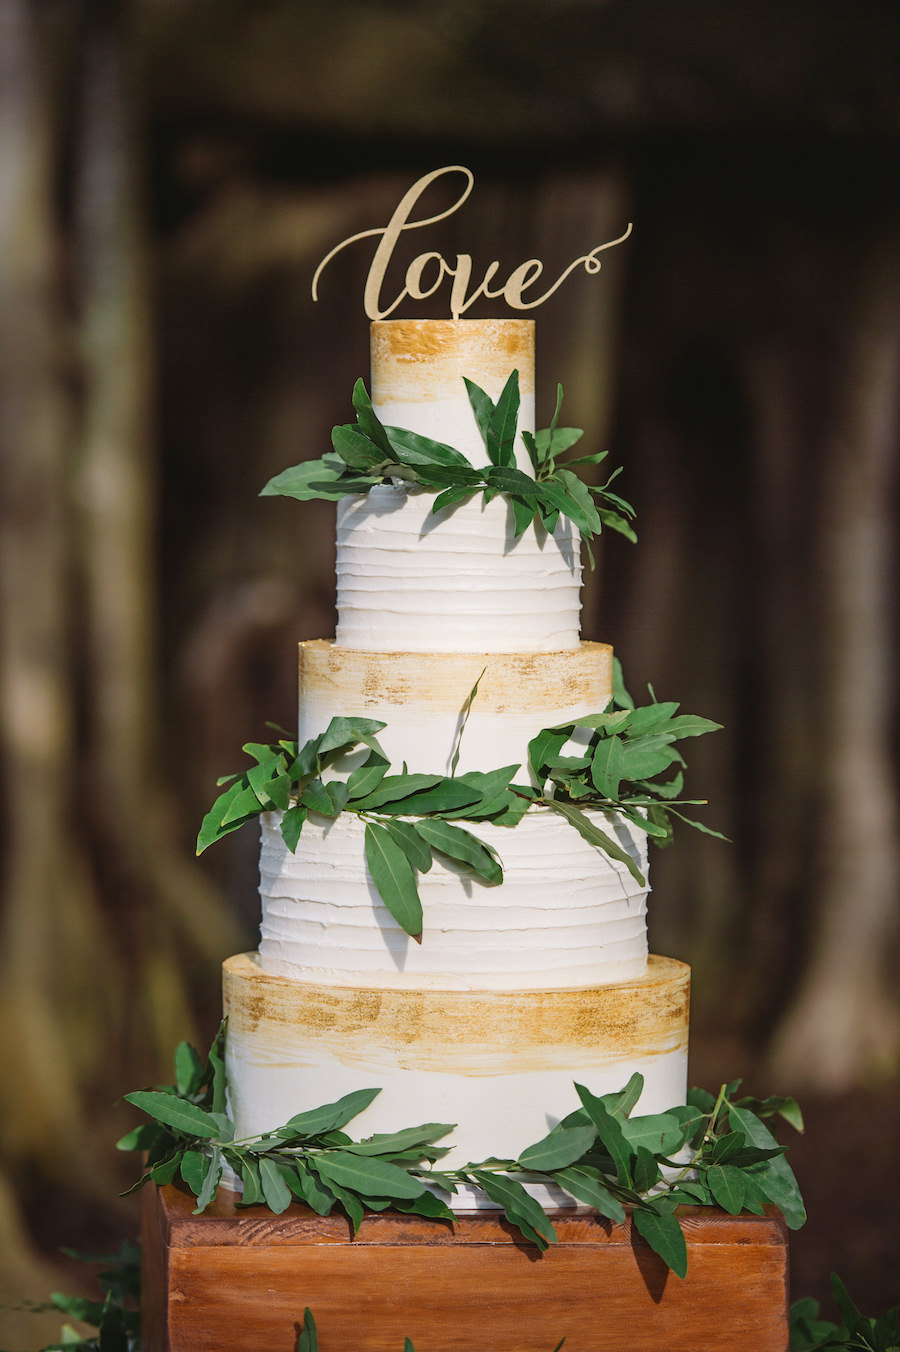 Four Tier Round White Rustic Wedding Cake with Hand Painted Gold Detail and Greenery on Wooden Cake Stand